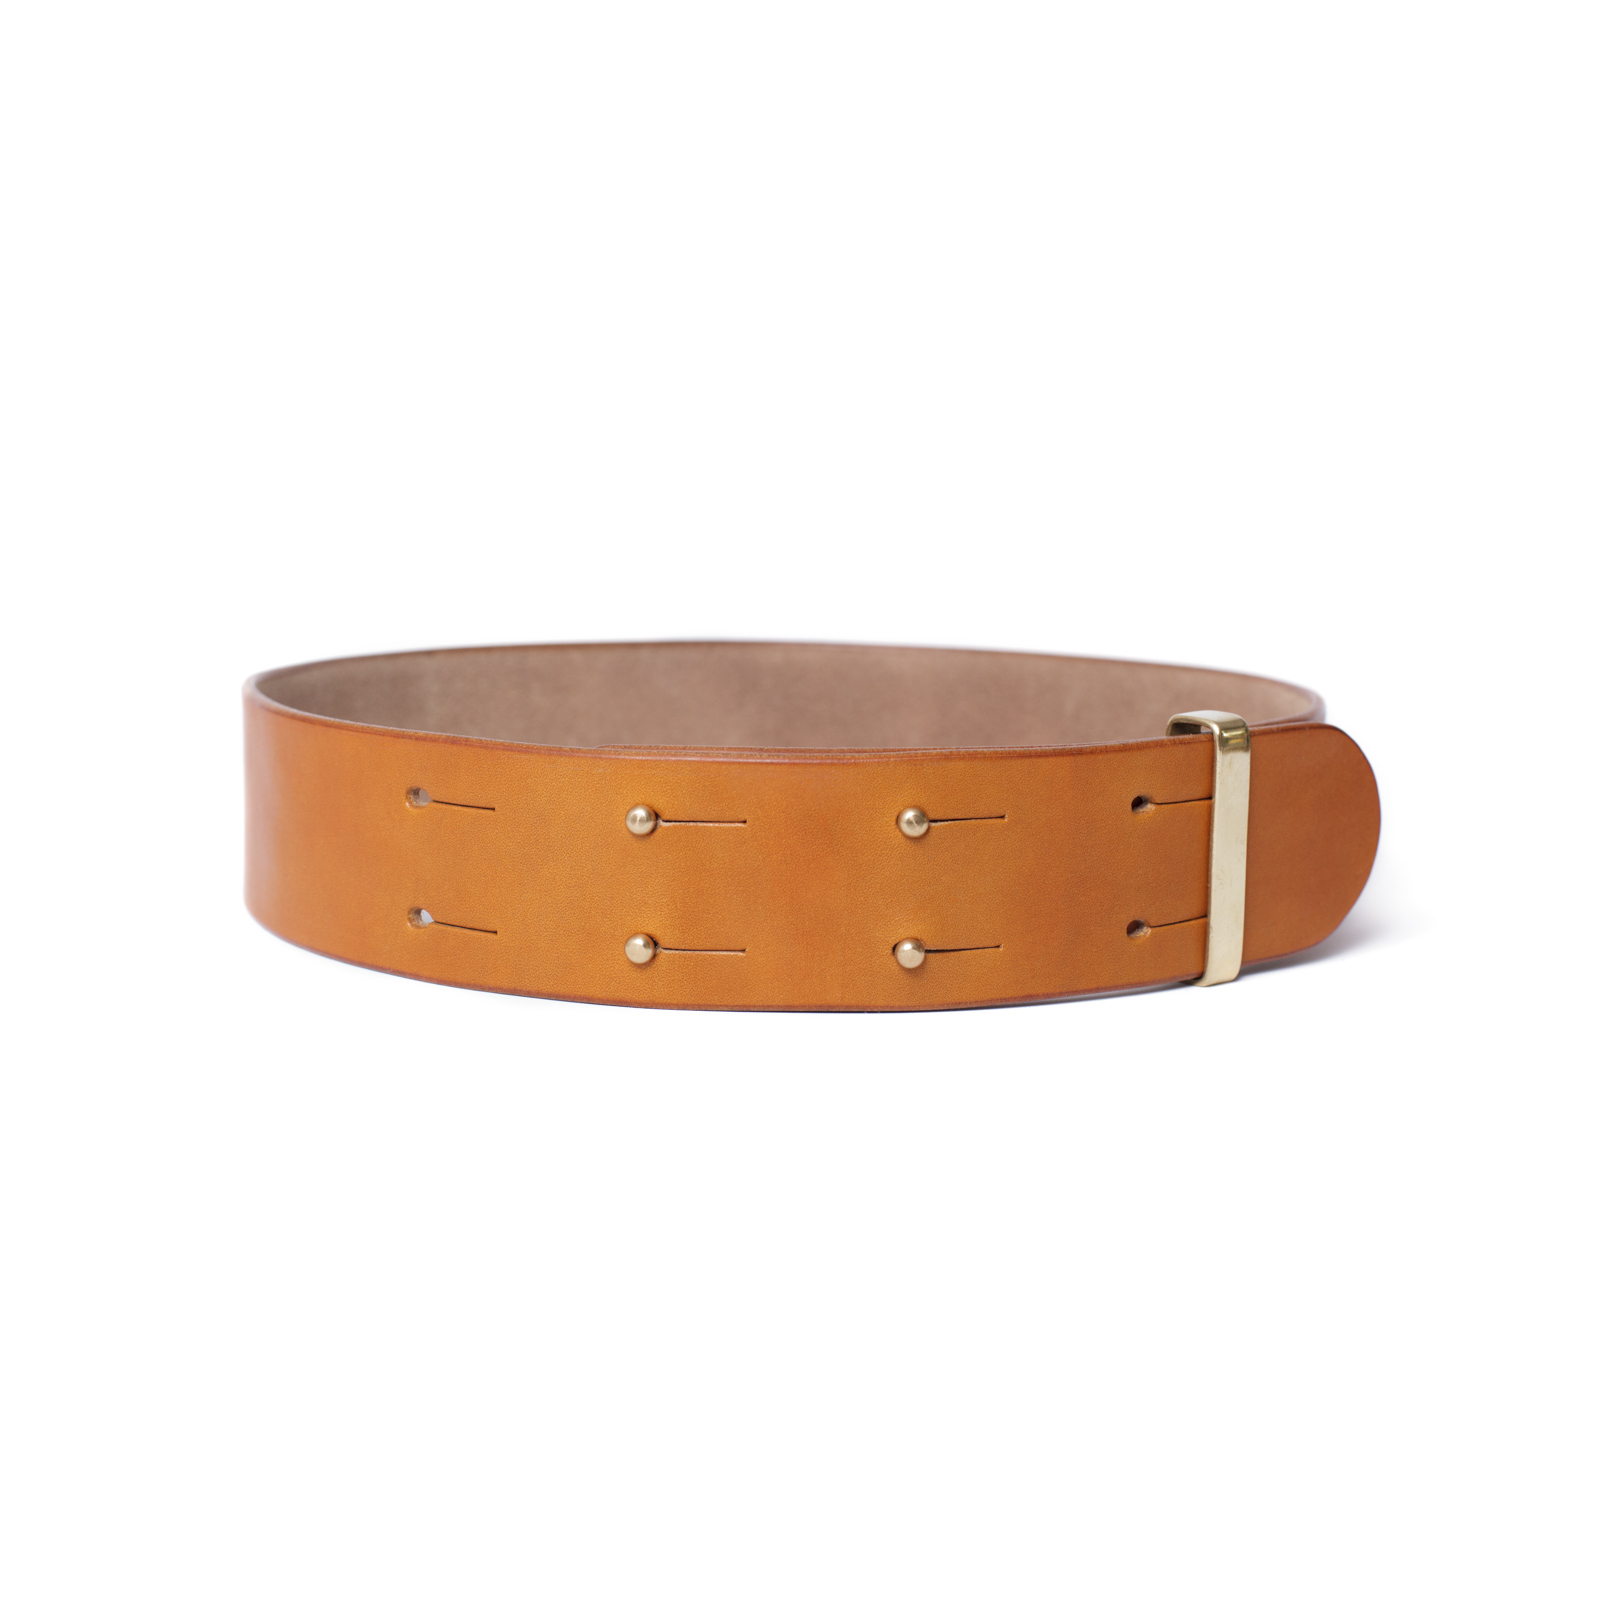 Hand crafted London Tan colour color english bridle leather belt with solid brass sam browne studs luxury goods heirloom dress